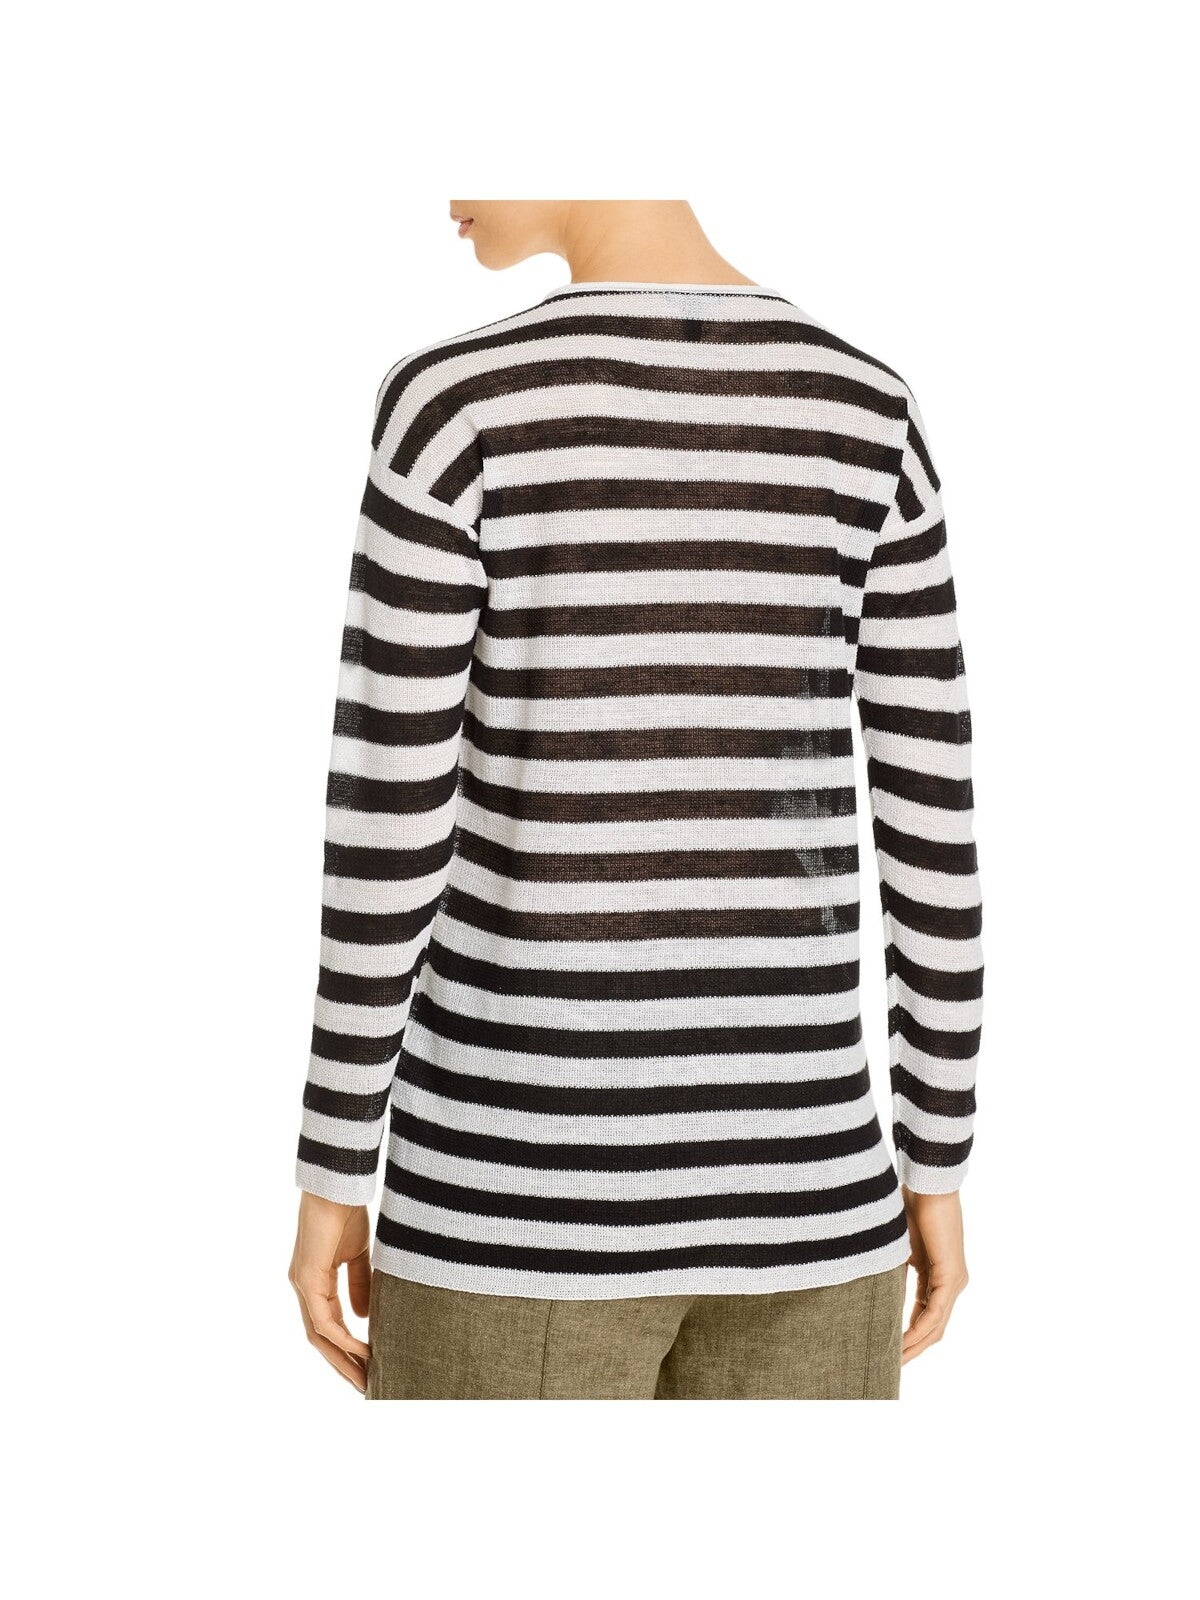 EILEEN FISHER Womens White Striped Long Sleeve Crew Neck Tunic Top S